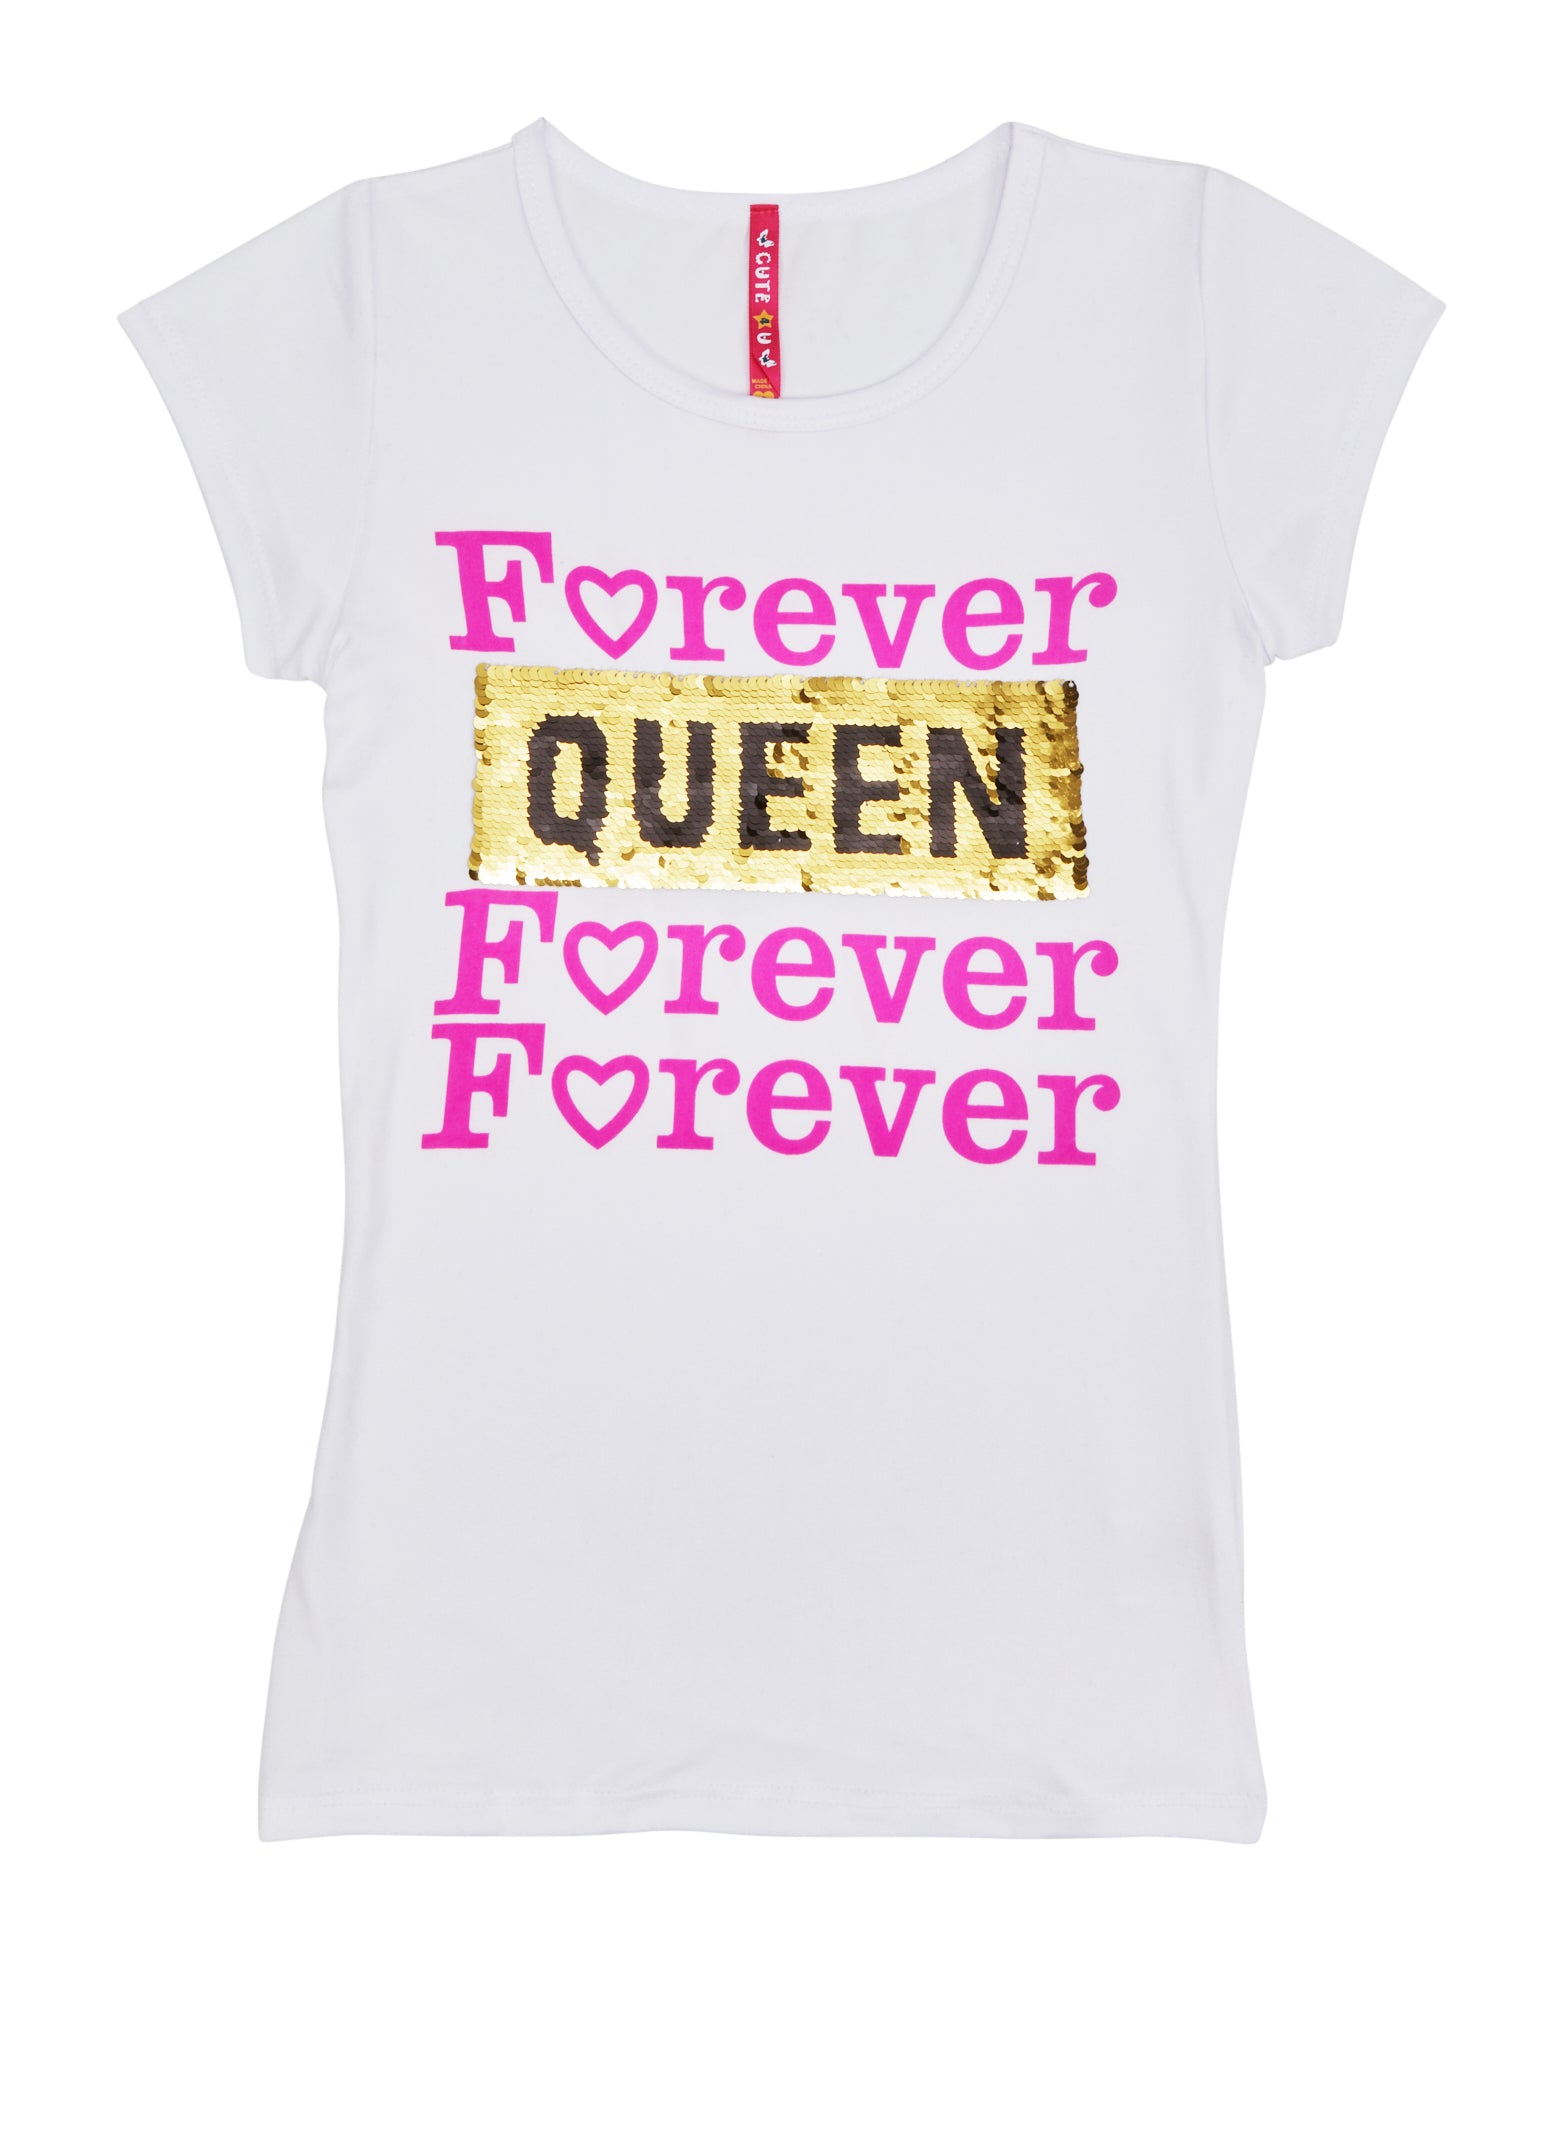 Girls Forever Queen Reversible Sequin Patch Graphic Tee, White, Size 10-12